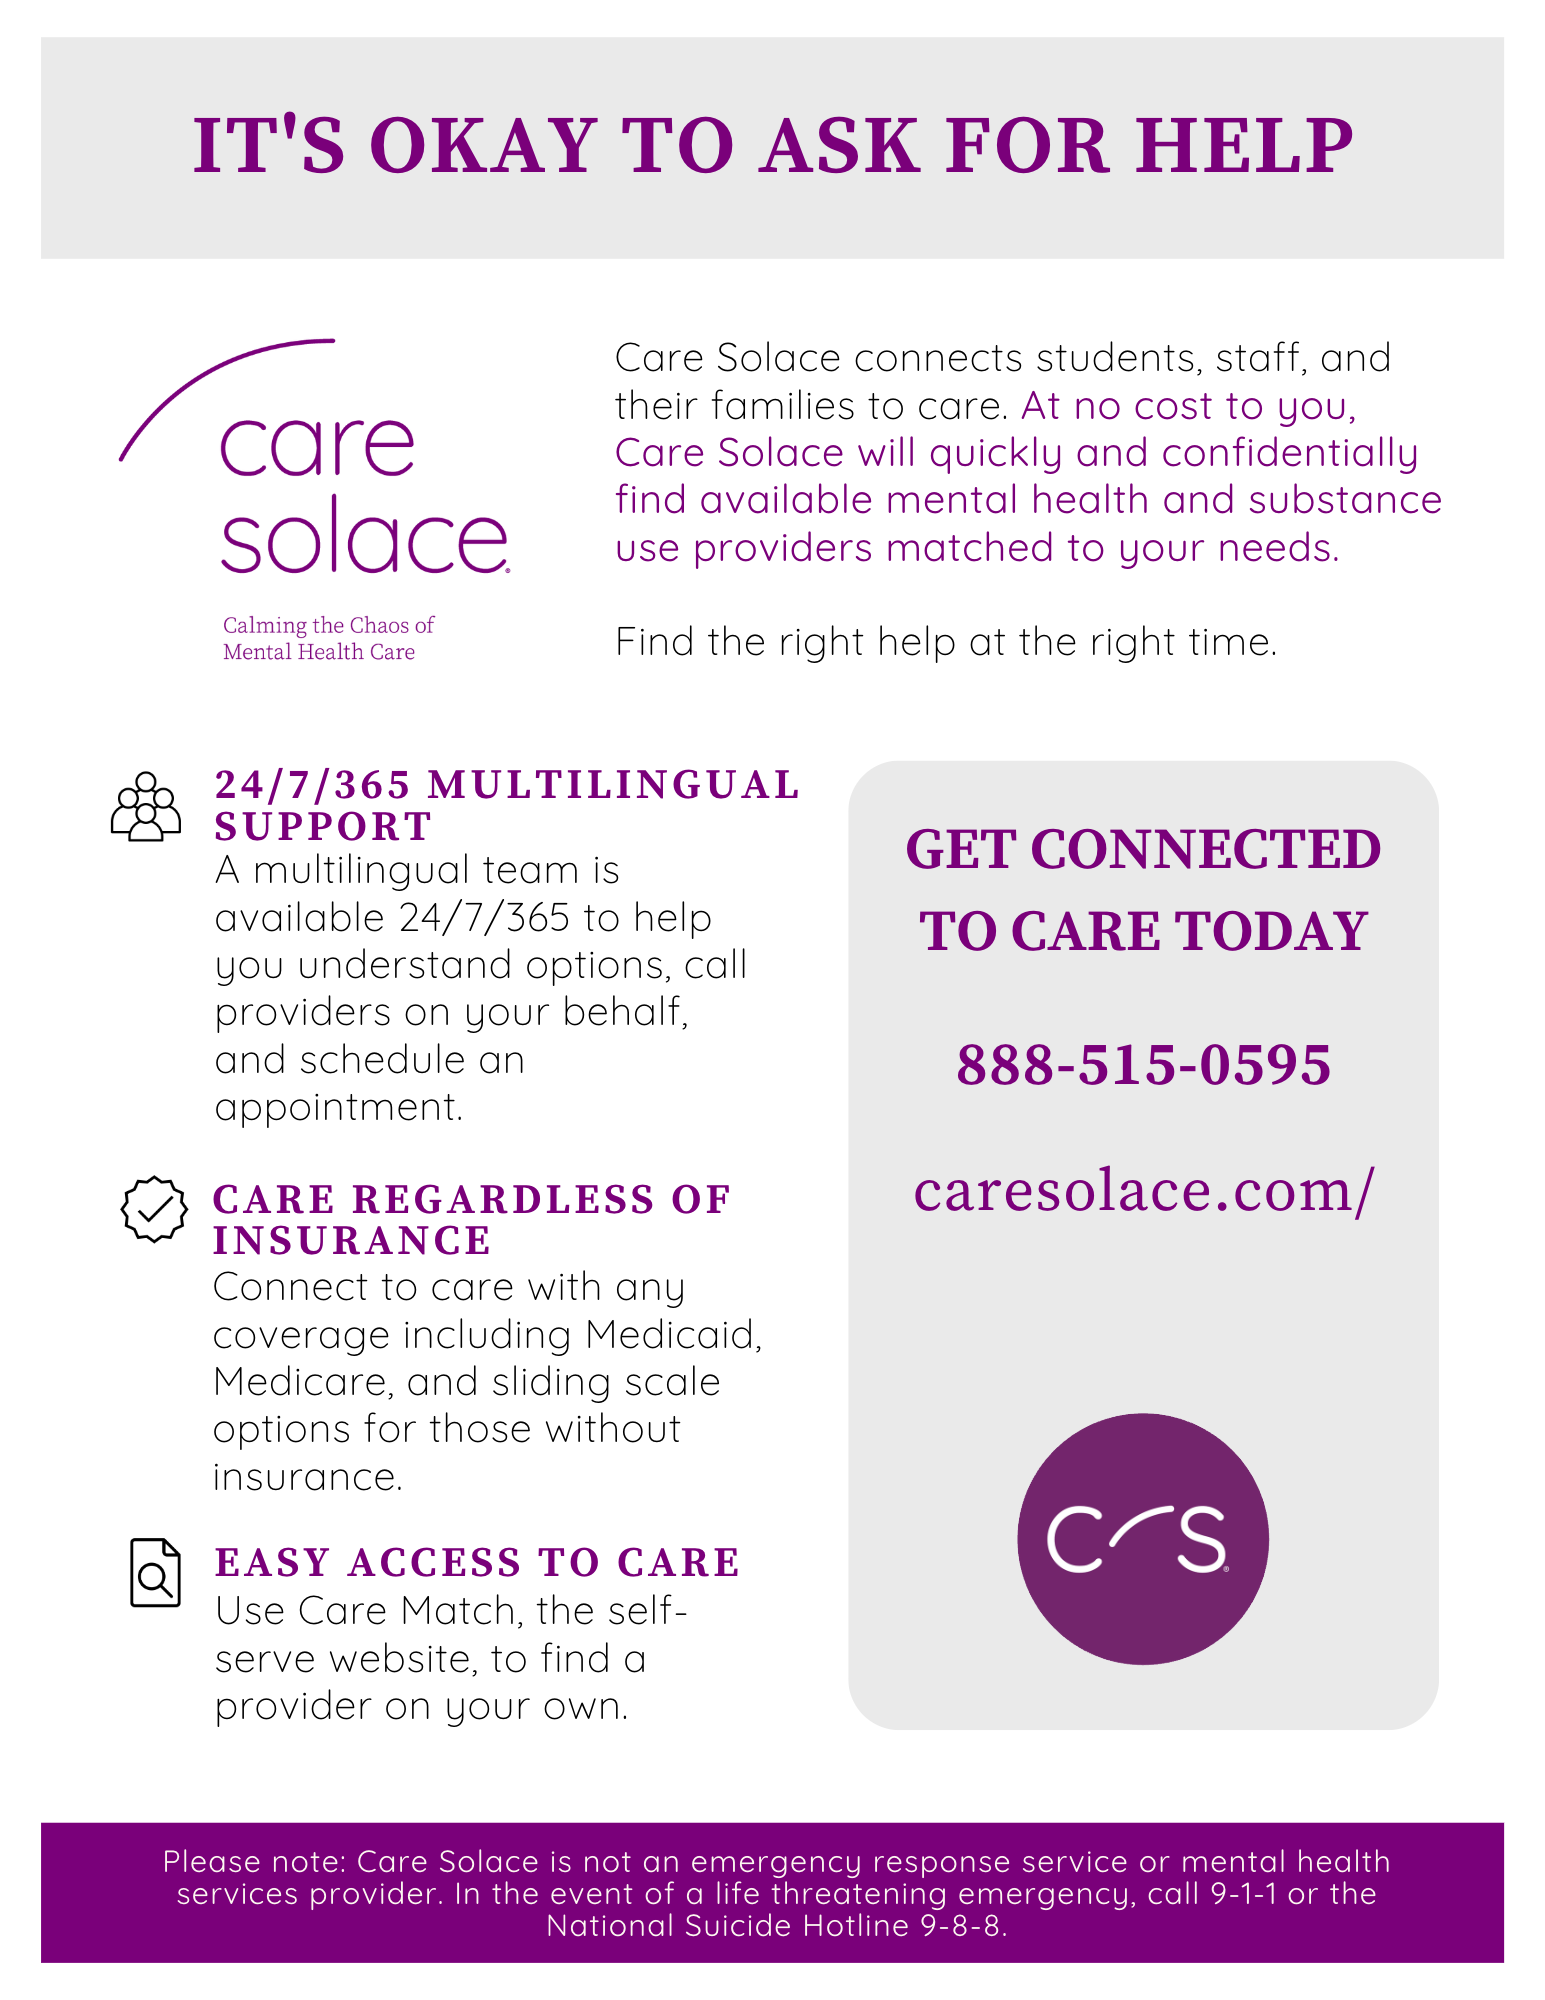 Care Solace flyer for families with phone numbers and websites. Call 888-515-0595 or caresolace.com/durham to connect with services